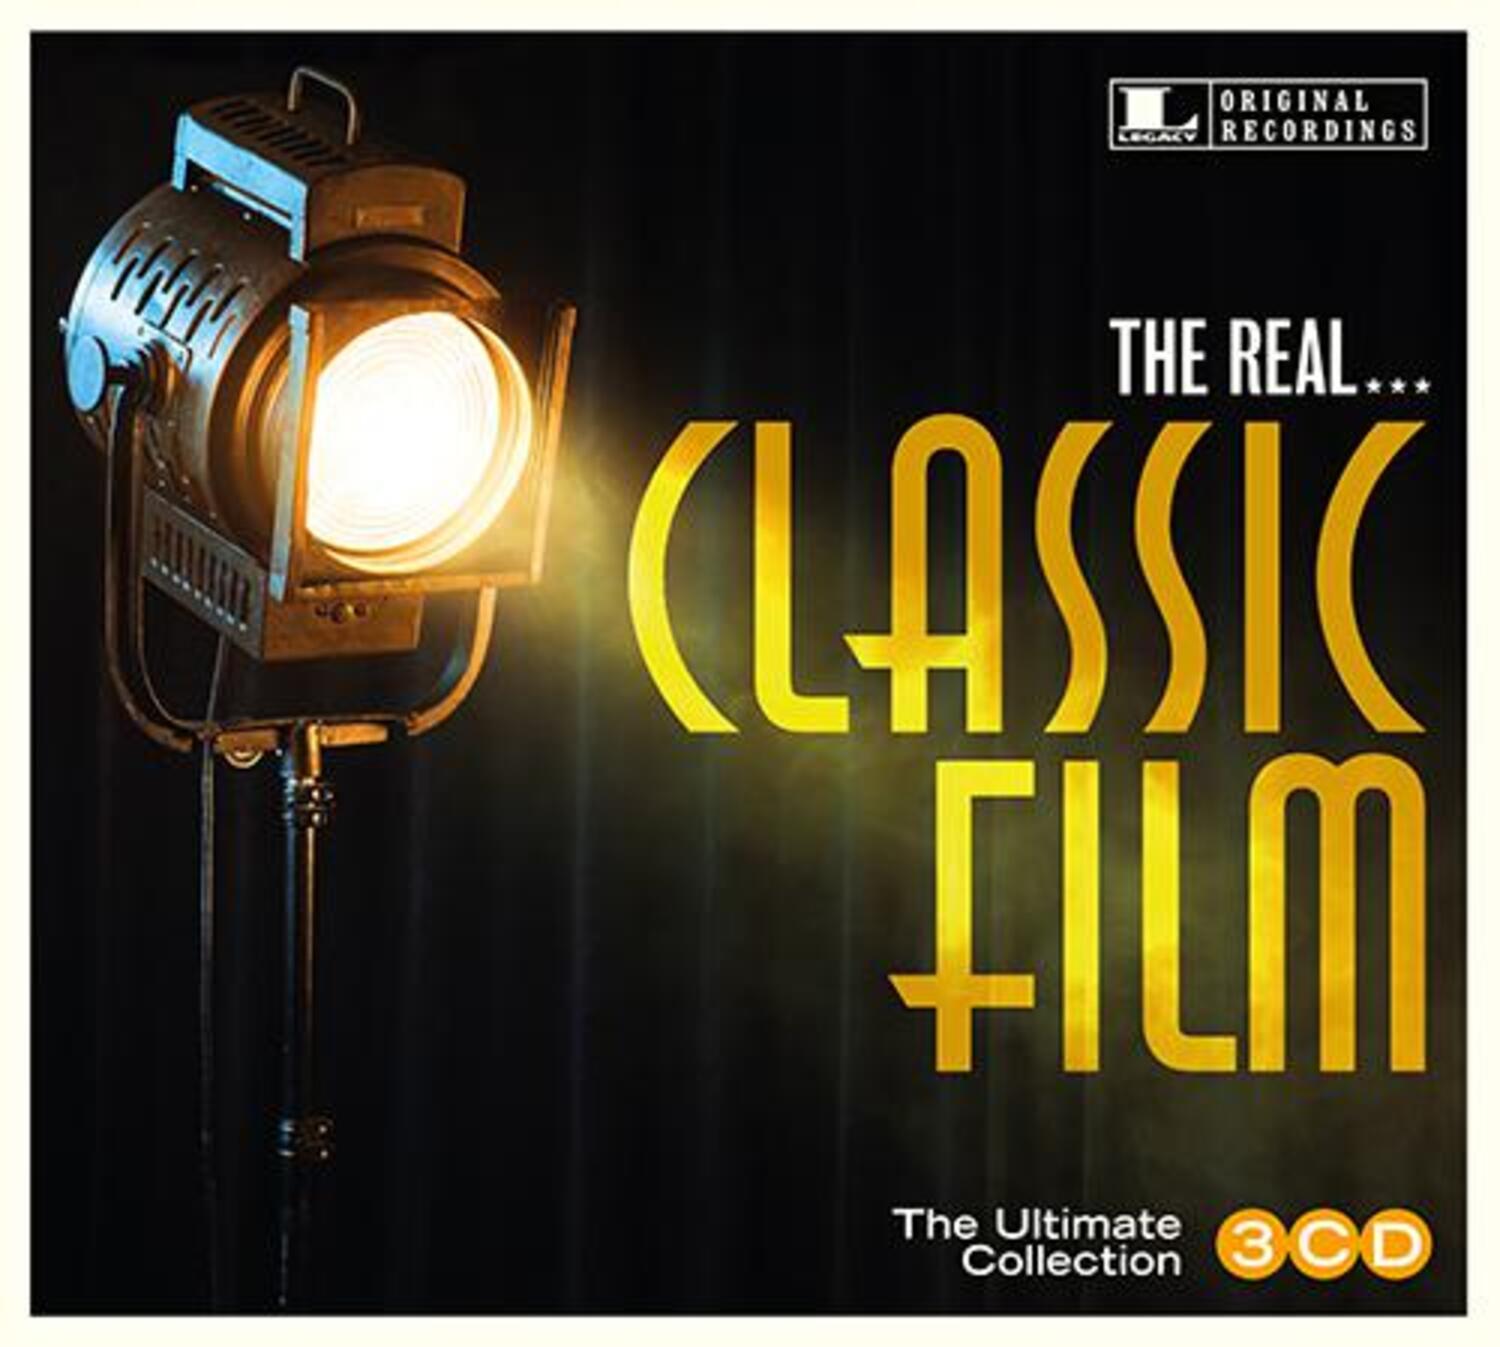 THE ULTIMATE CLASSIC FILM SOUNDTRACK COLLECTION - [THE REAL... CLASSIC FILM] (3CD)